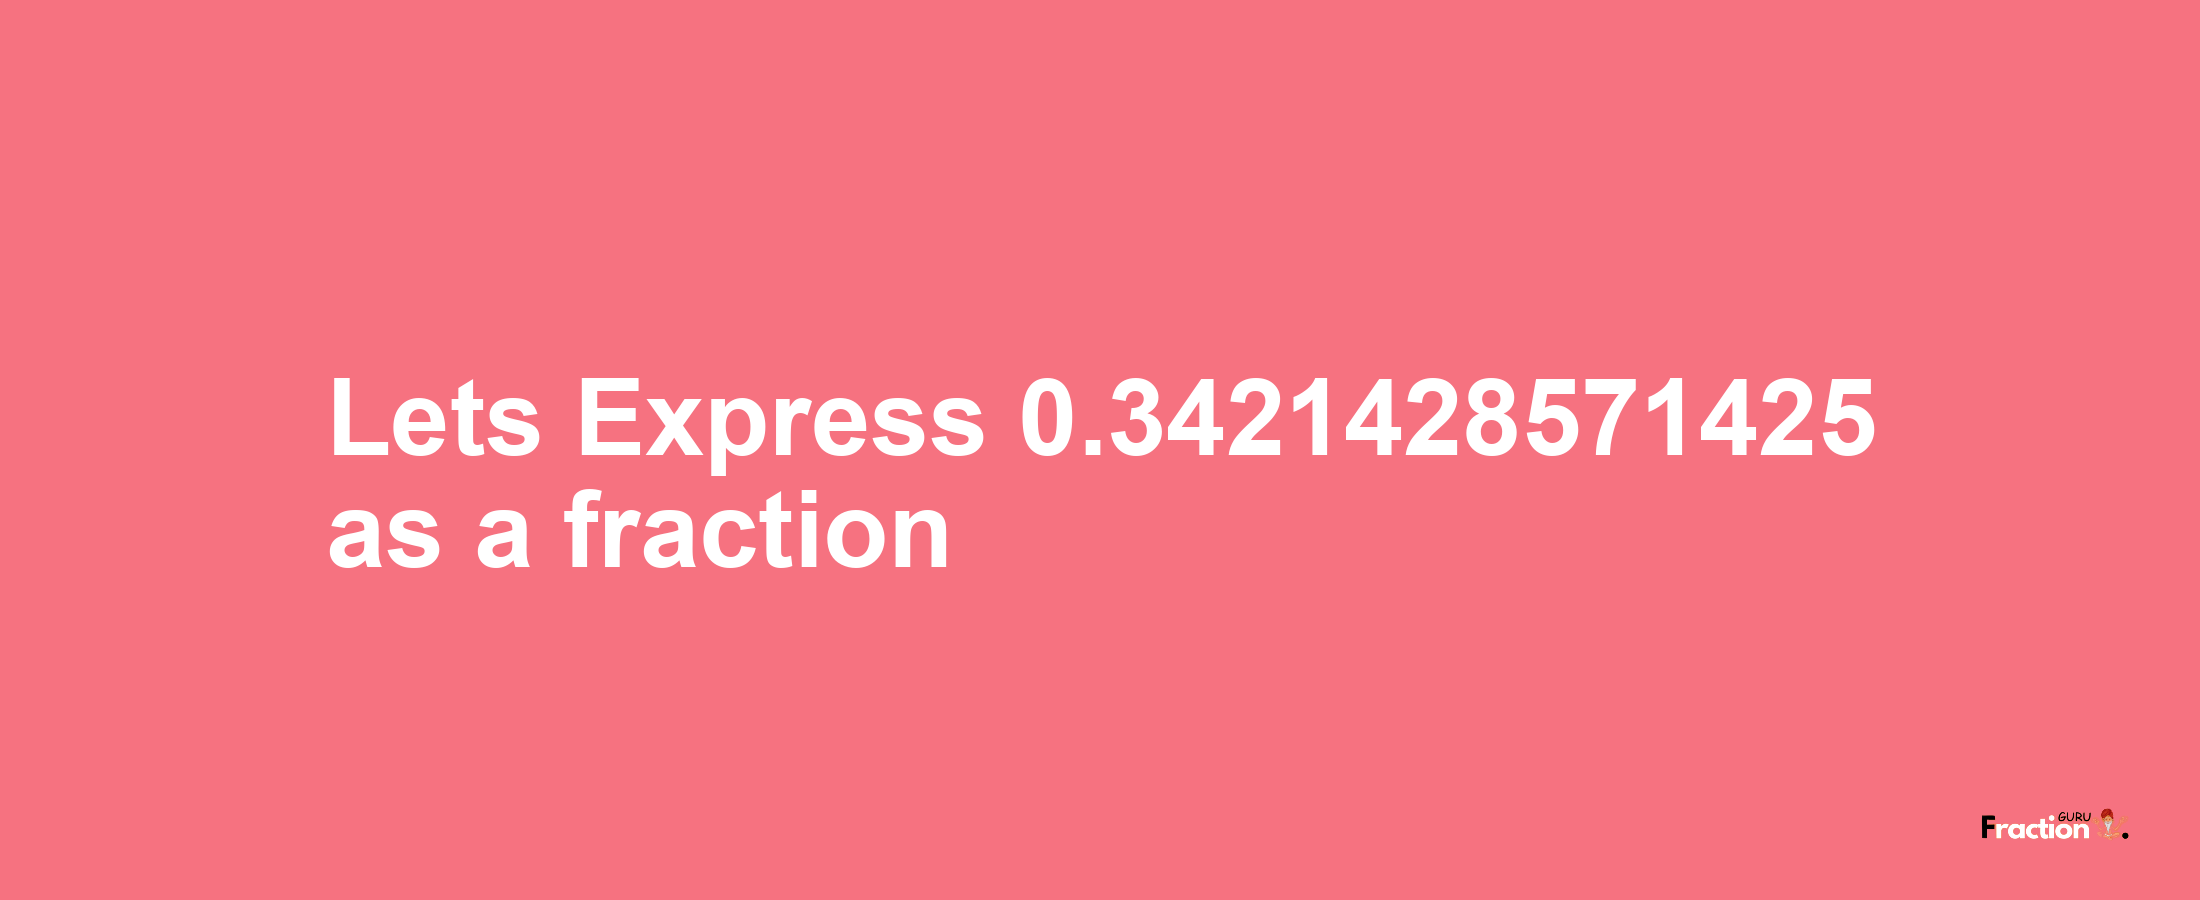 Lets Express 0.3421428571425 as afraction